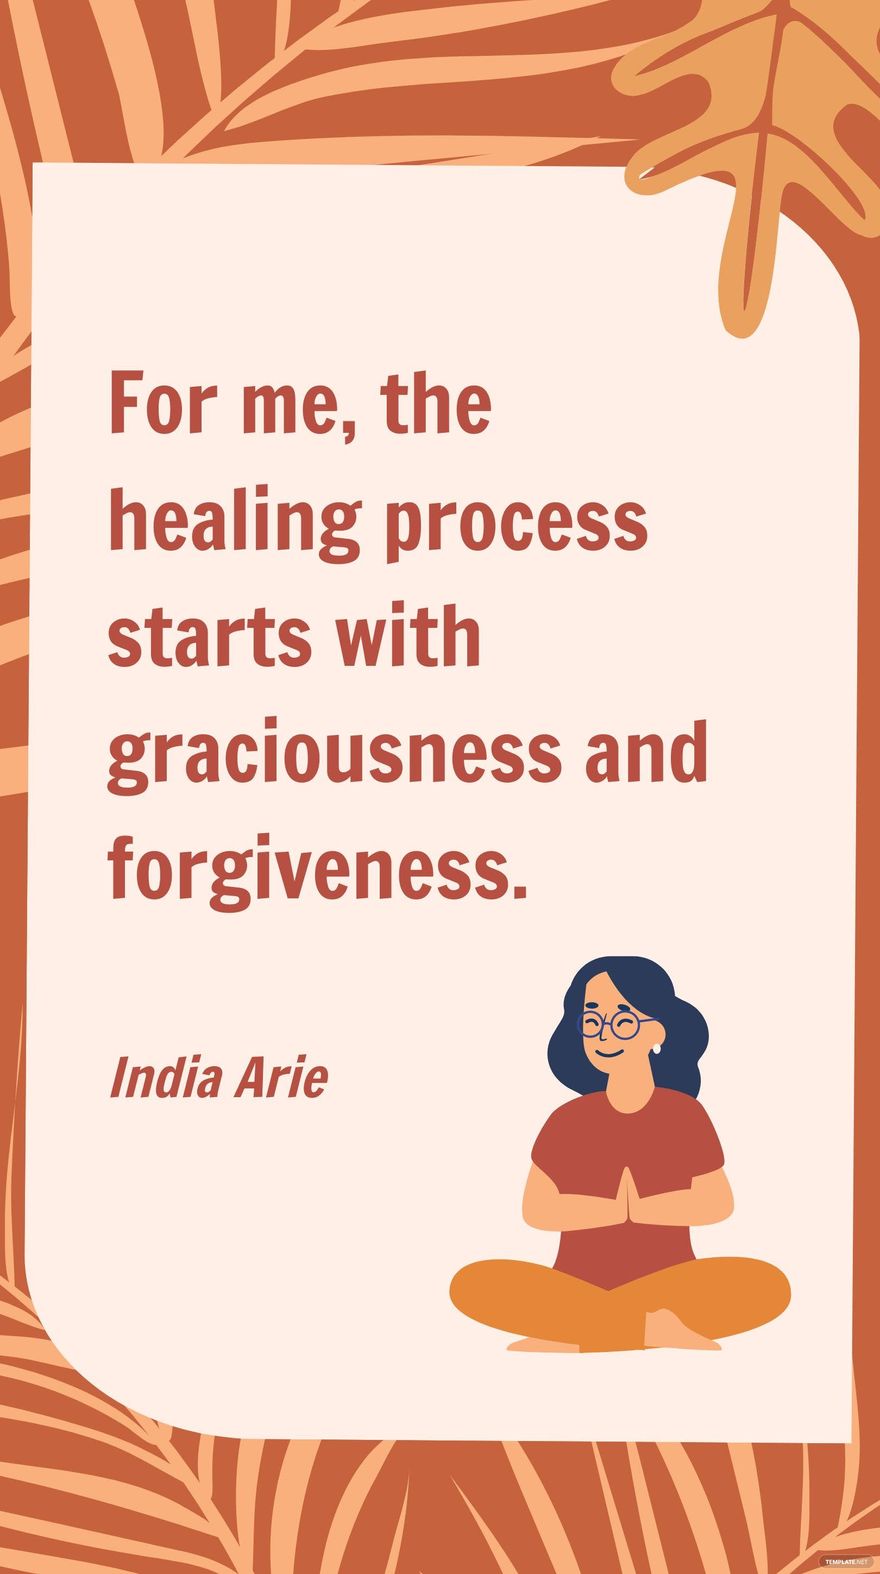 Free India Arie - For me, the healing process starts with graciousness and forgiveness.